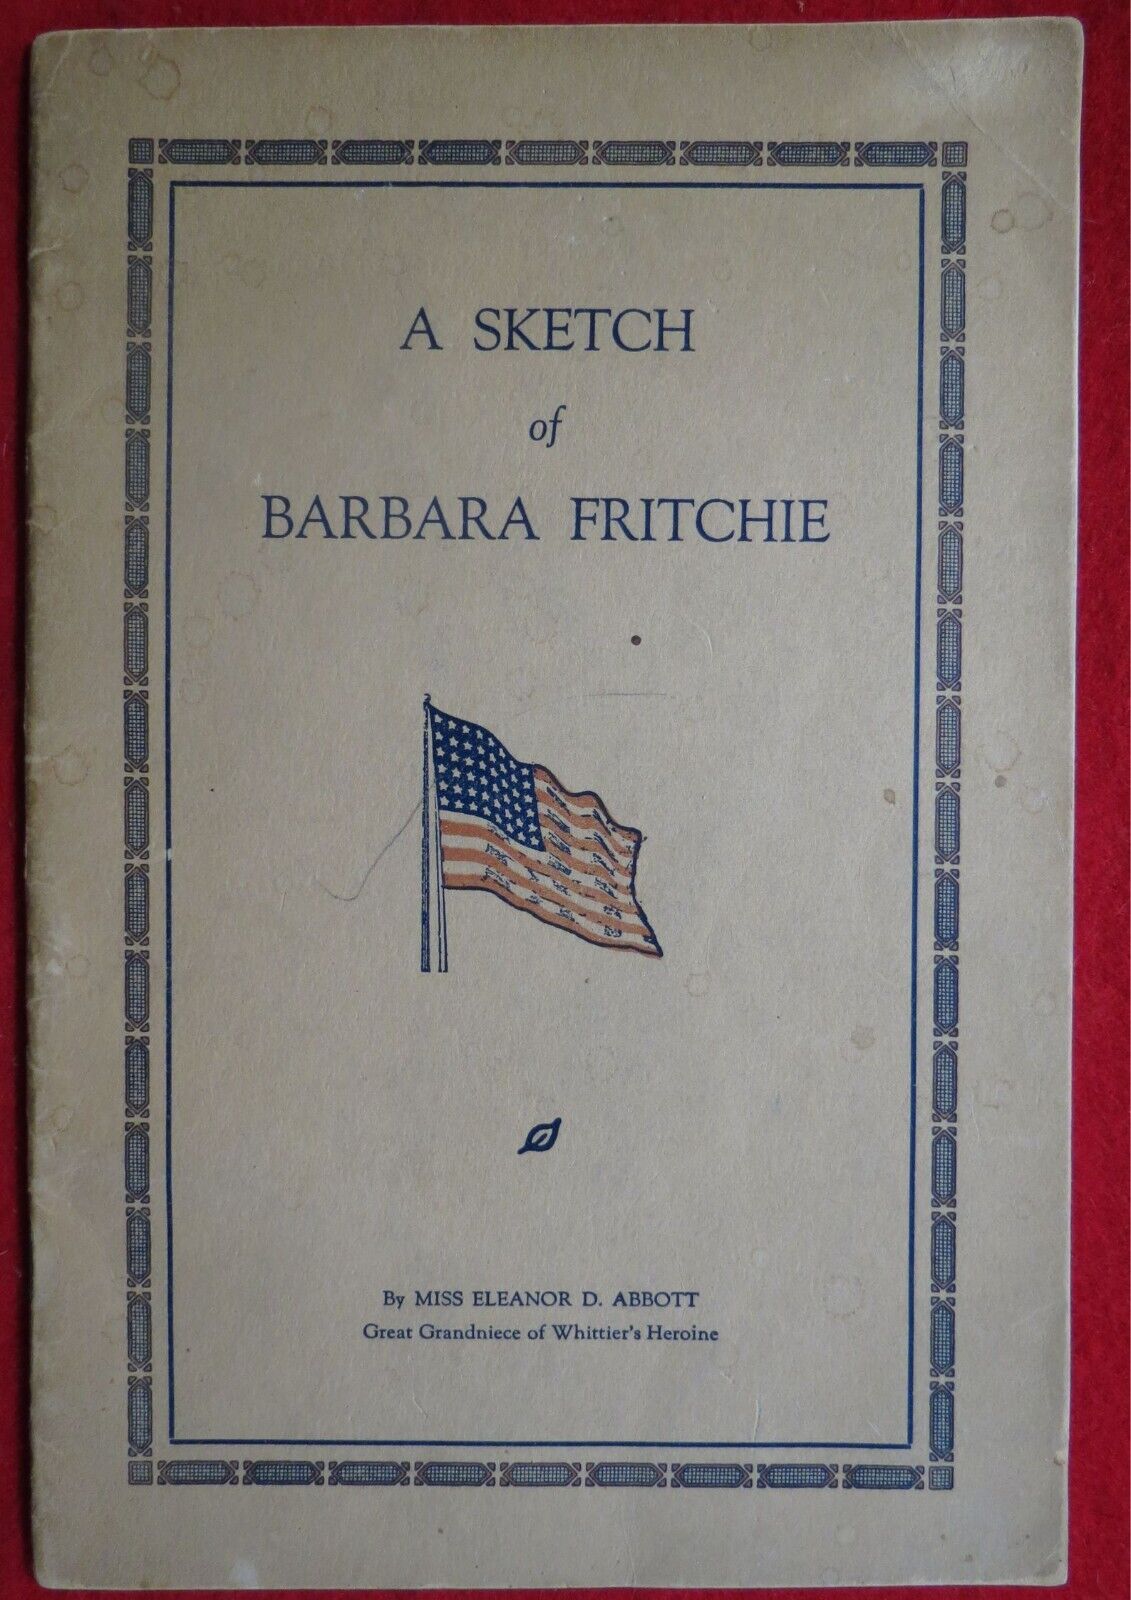 A Sketch of Barbara Fritchie by Eleanor D. Abbott, Signed Copy, 1937 Booklet